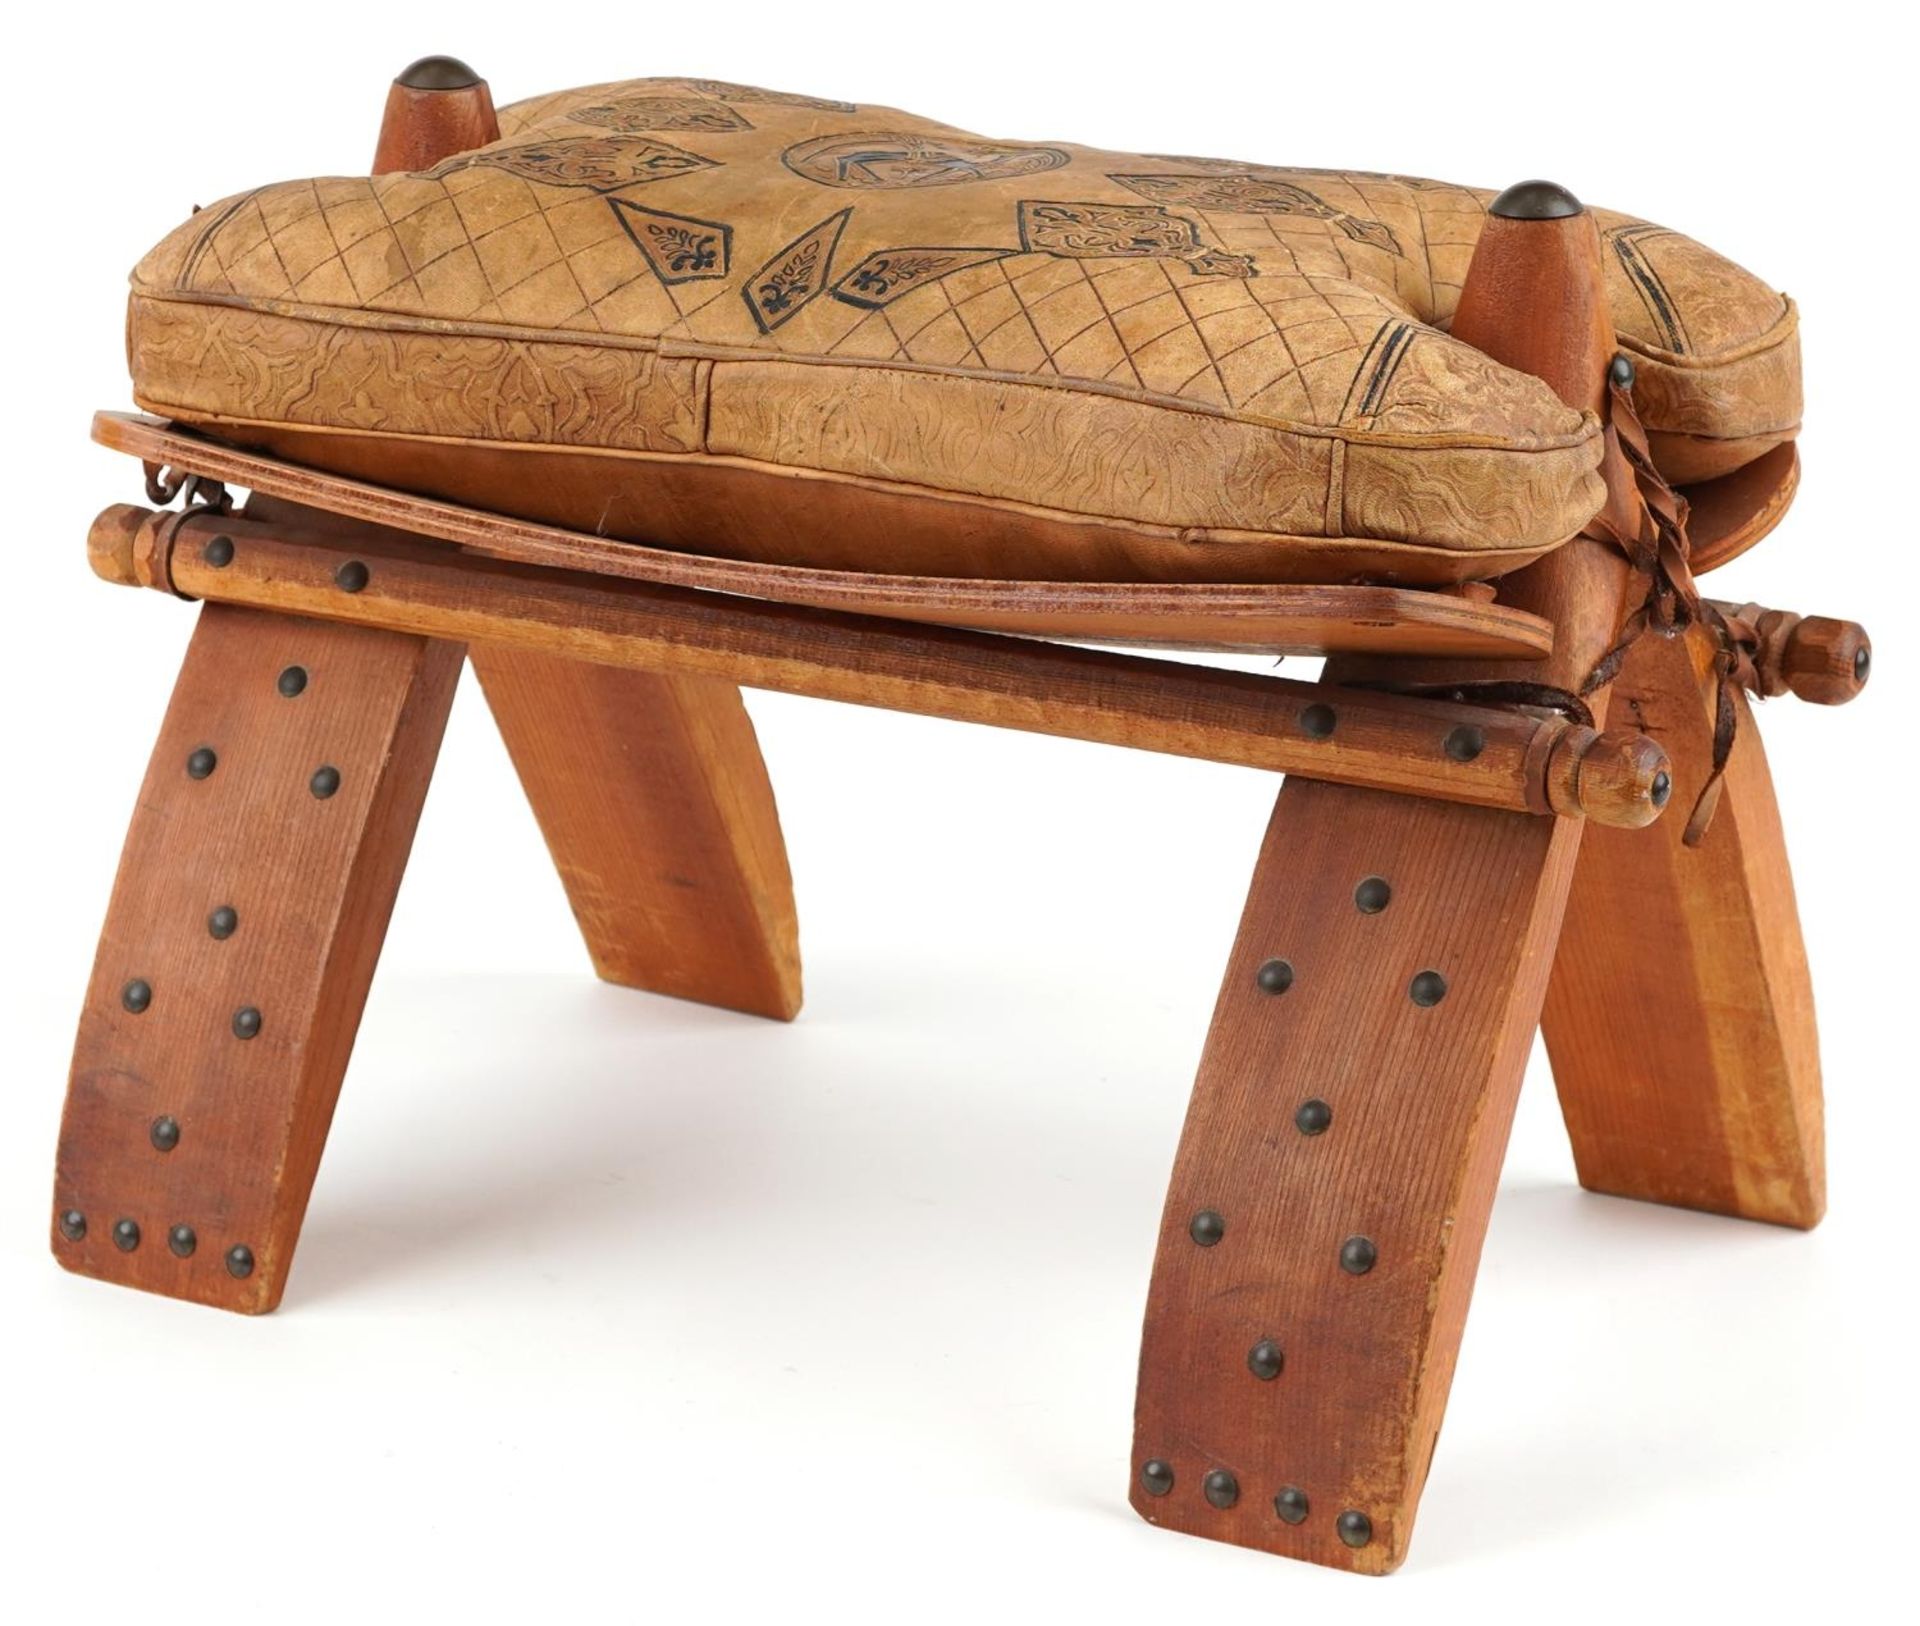 Vintage hardwood camel stool with leather upholstered cushion tooled with foliate motifs and a